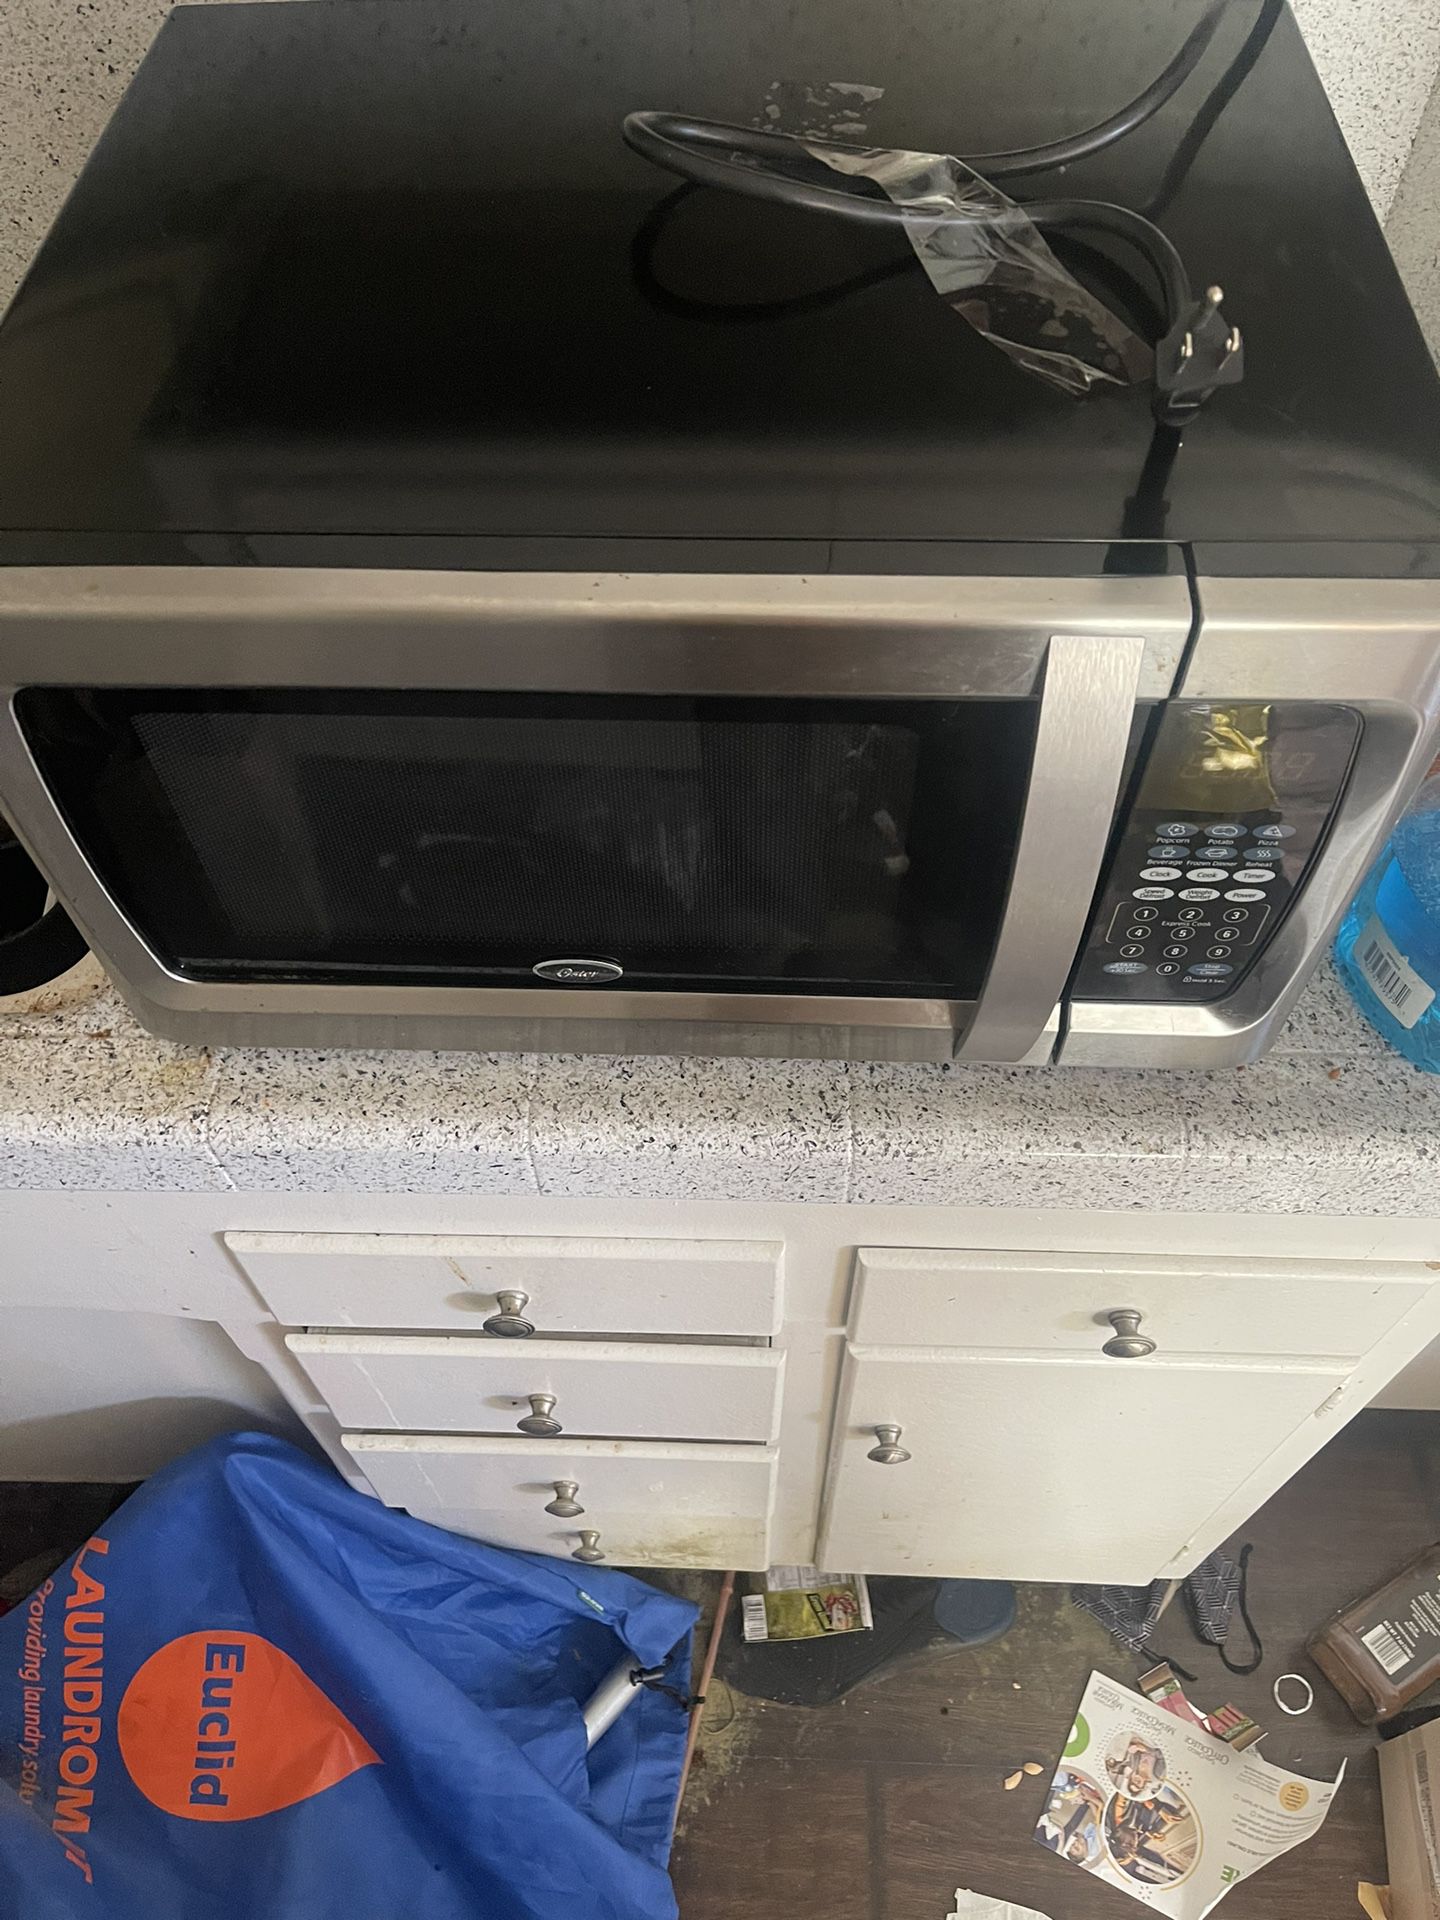 Oster Full Size Microwave